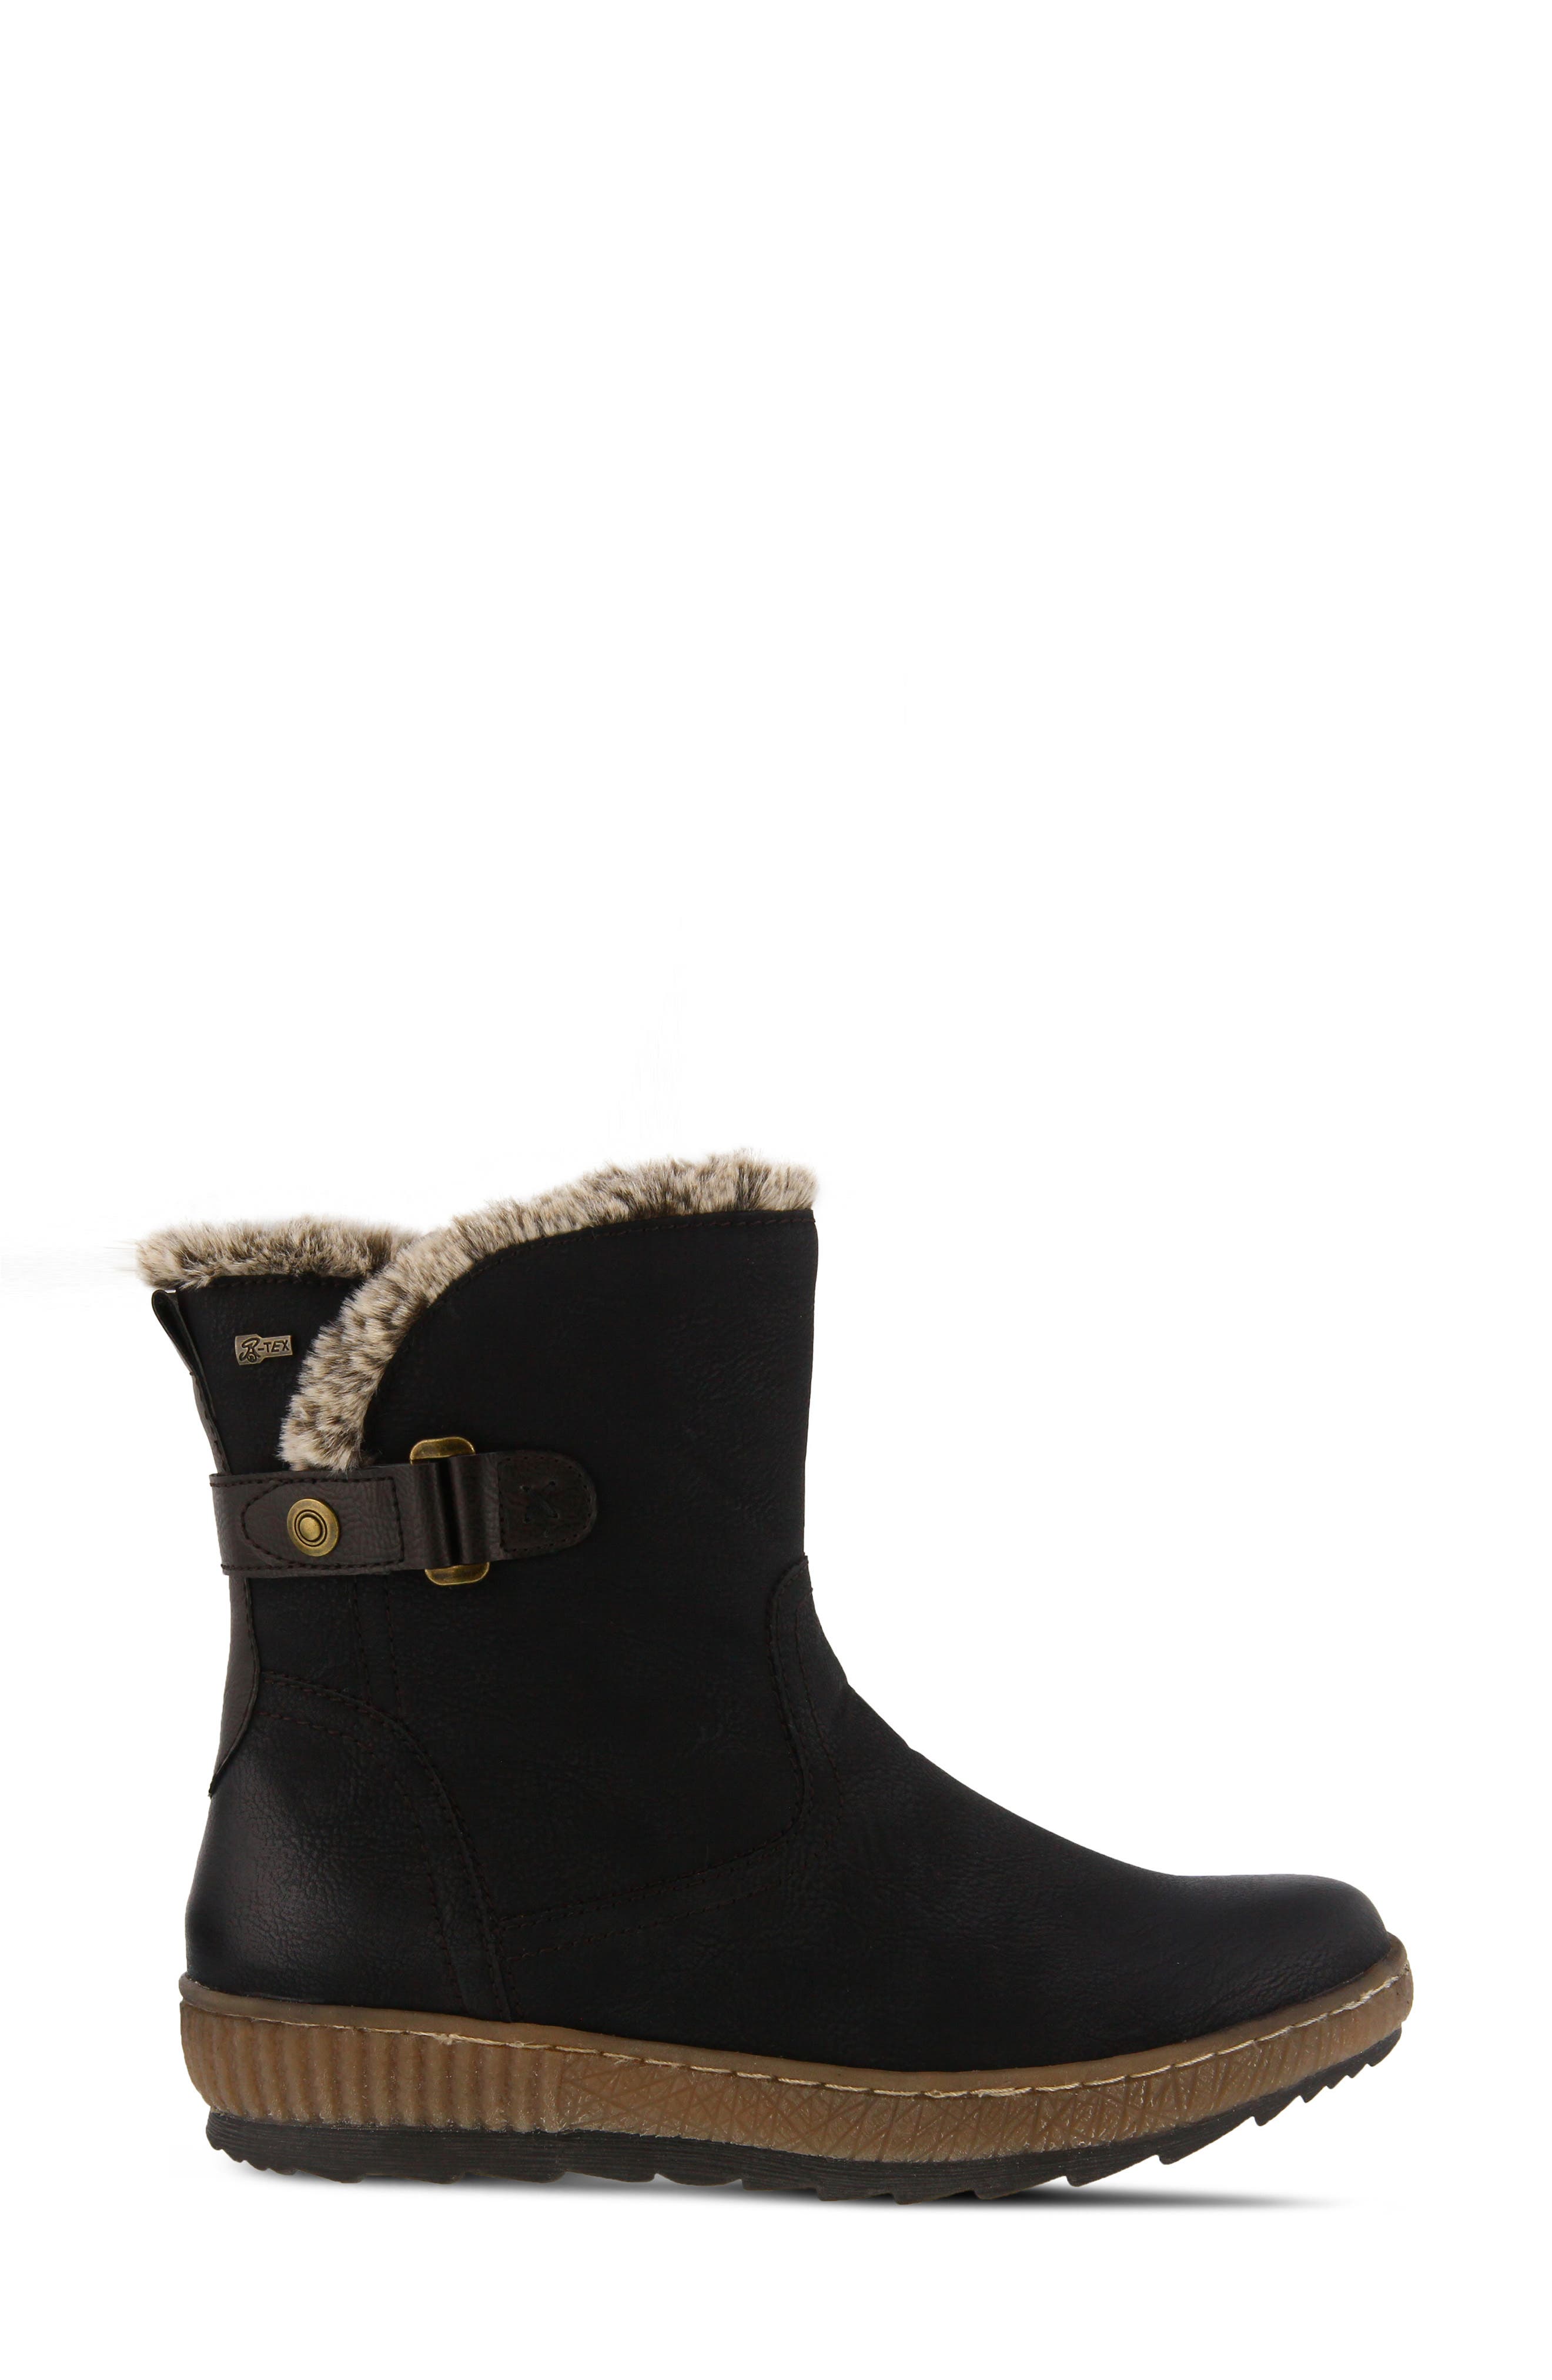 water resistant boots womens